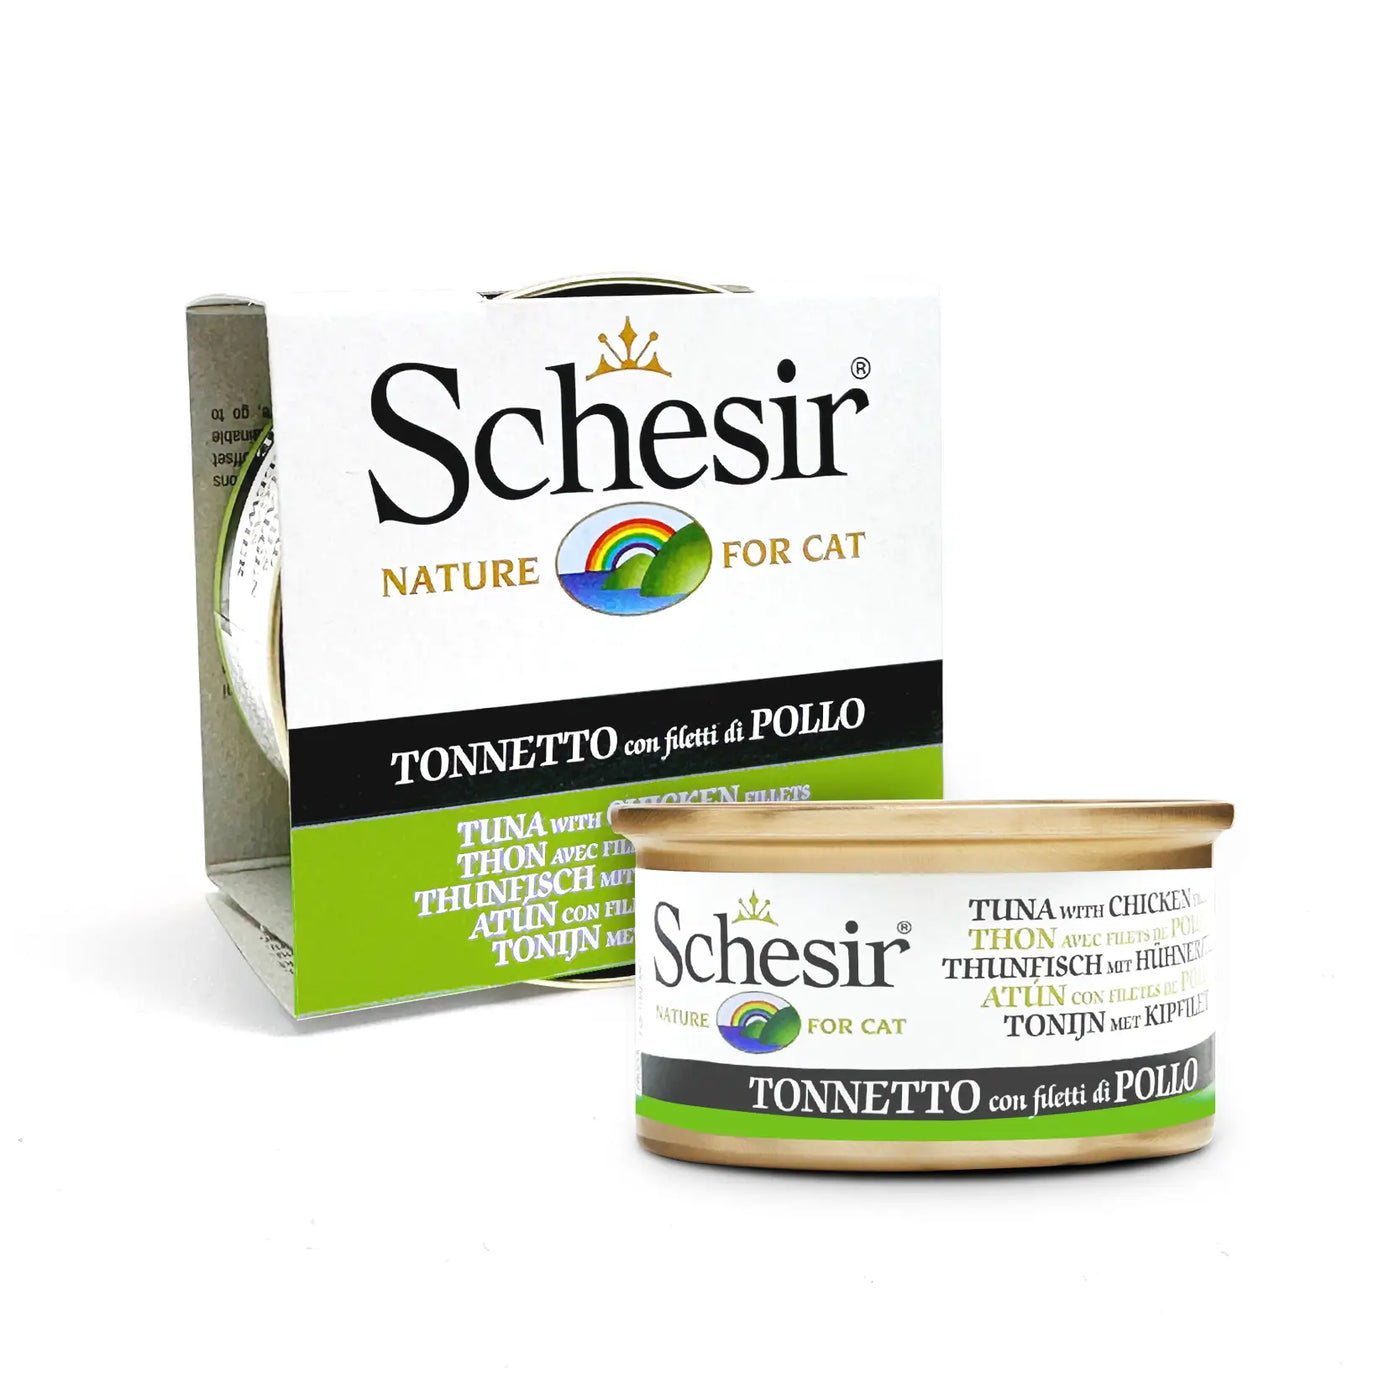 Schesir - Complementary Wet Food for Adult Cats - Tuna with Chicken 85g